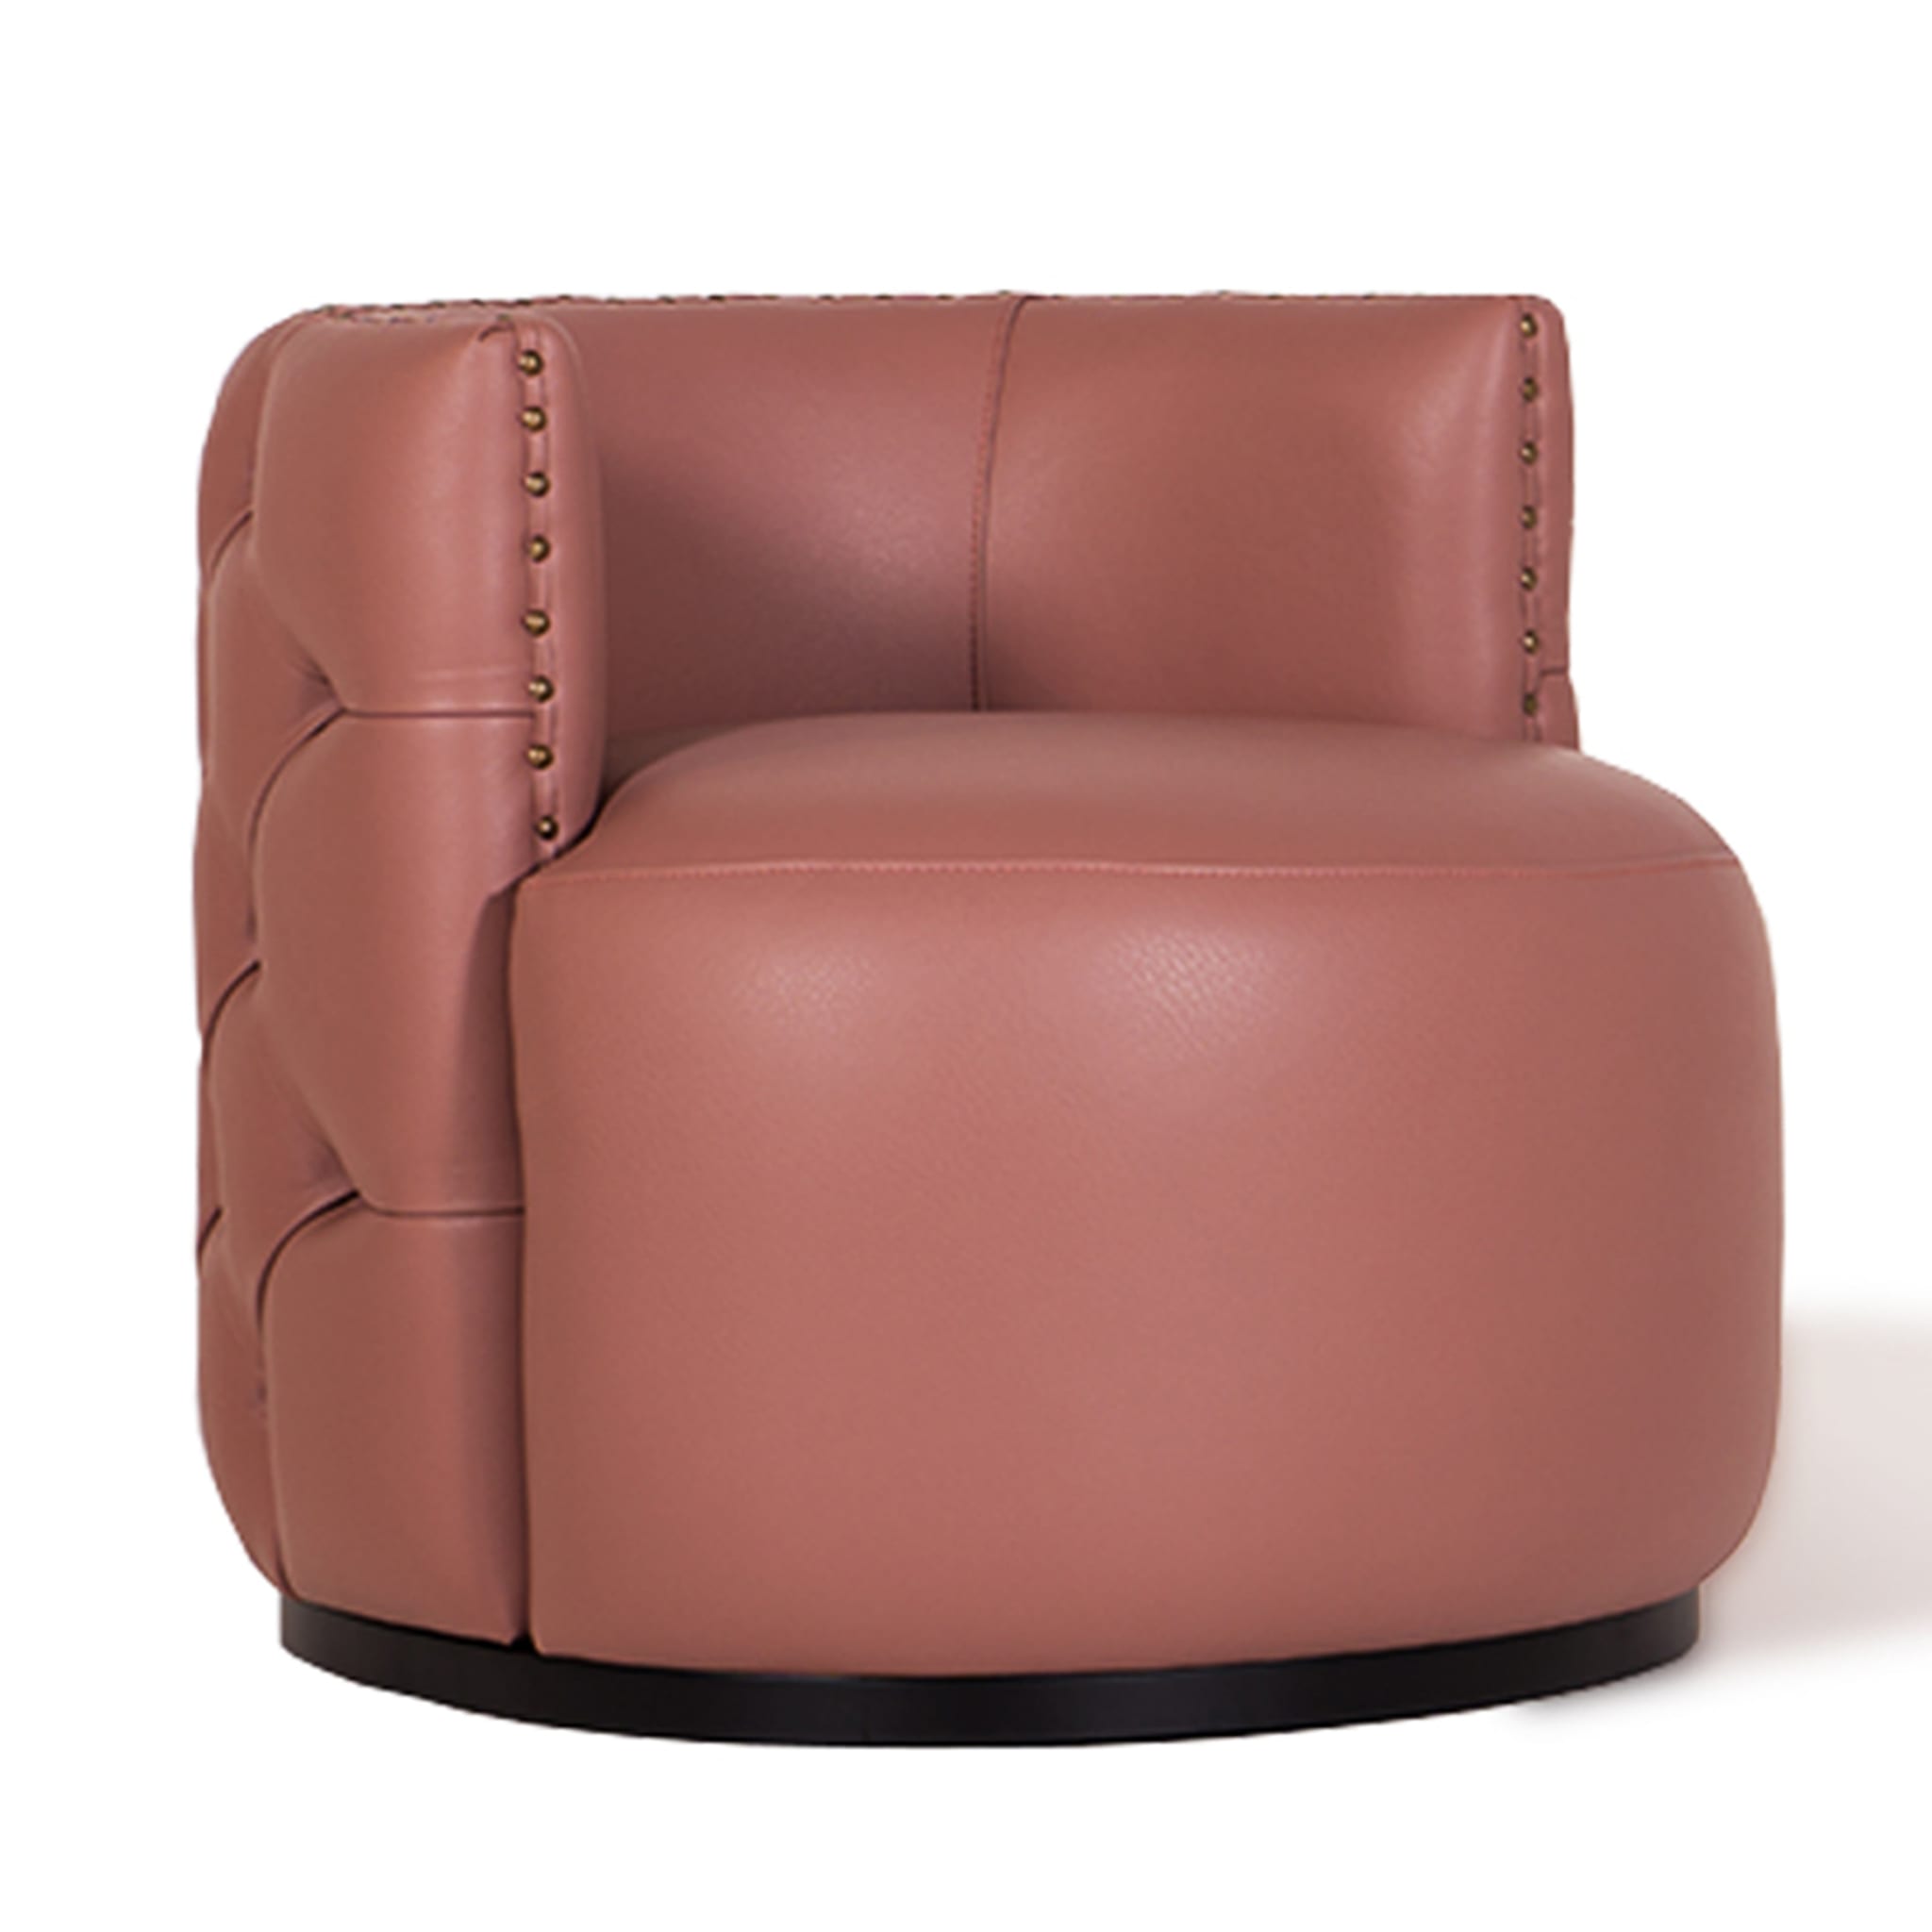 Petra Leather Armchair by Marco & Giulio Mantellassi - Alternative view 5